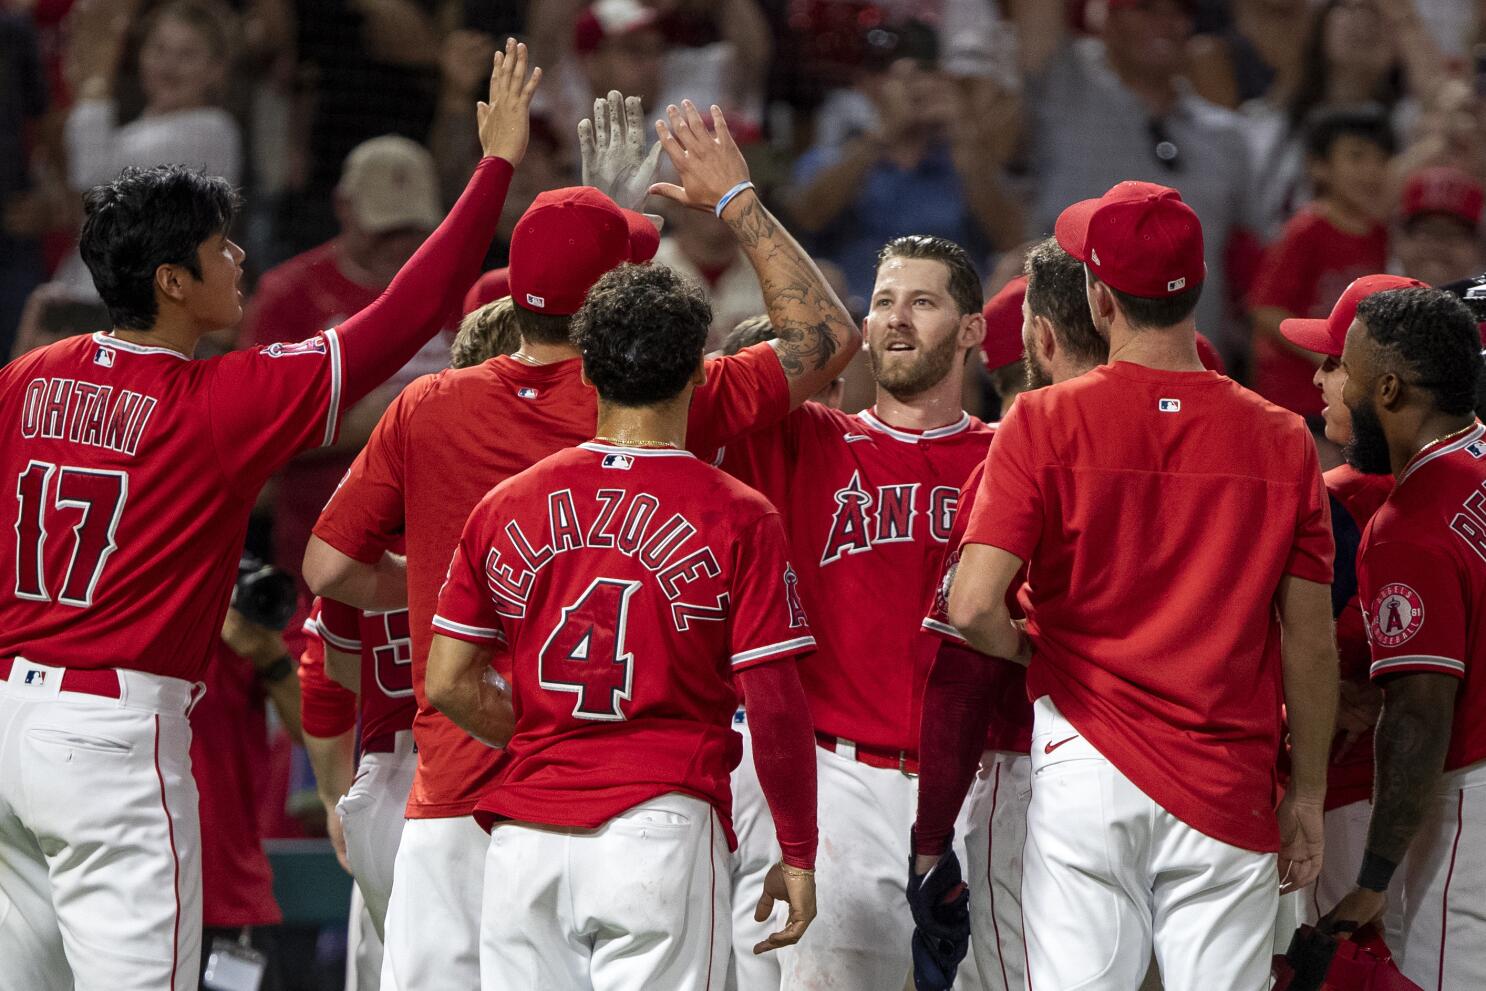 Taylor Ward lifts Los Angeles Angels to win over Cleveland Guardians